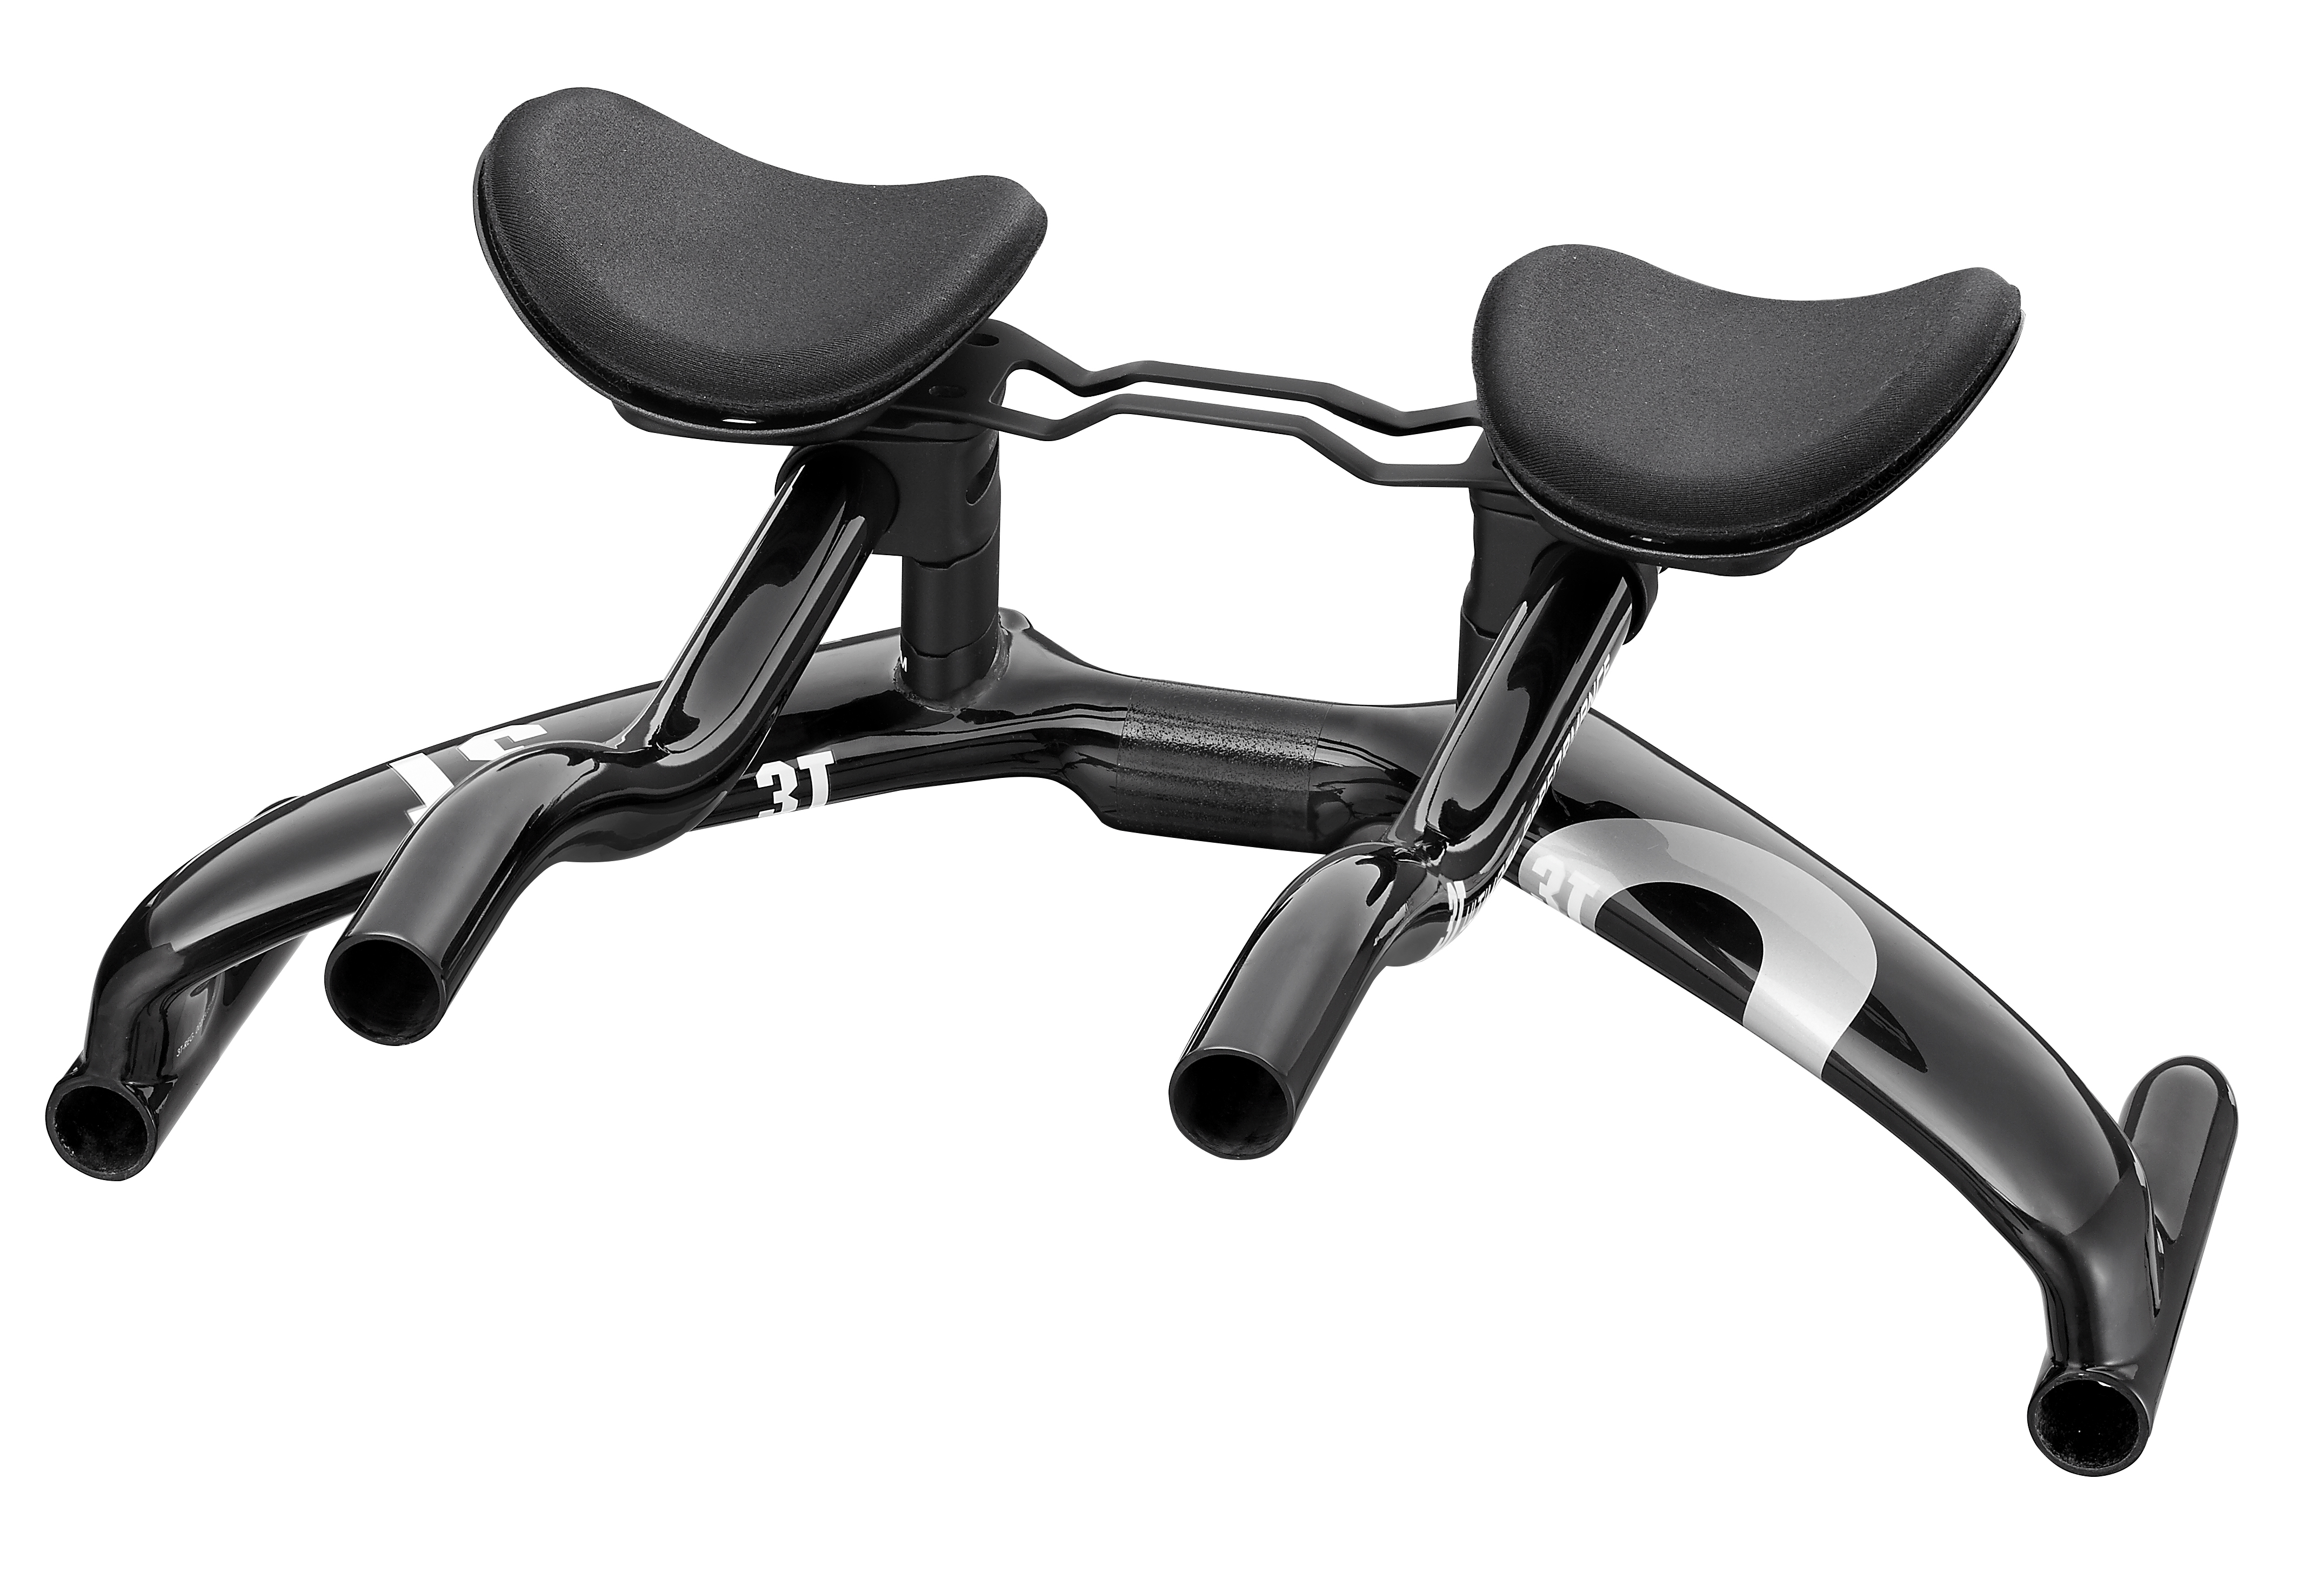 New 3T Revo aerobars claim improved control and safety Bicycle. www.bicycle...